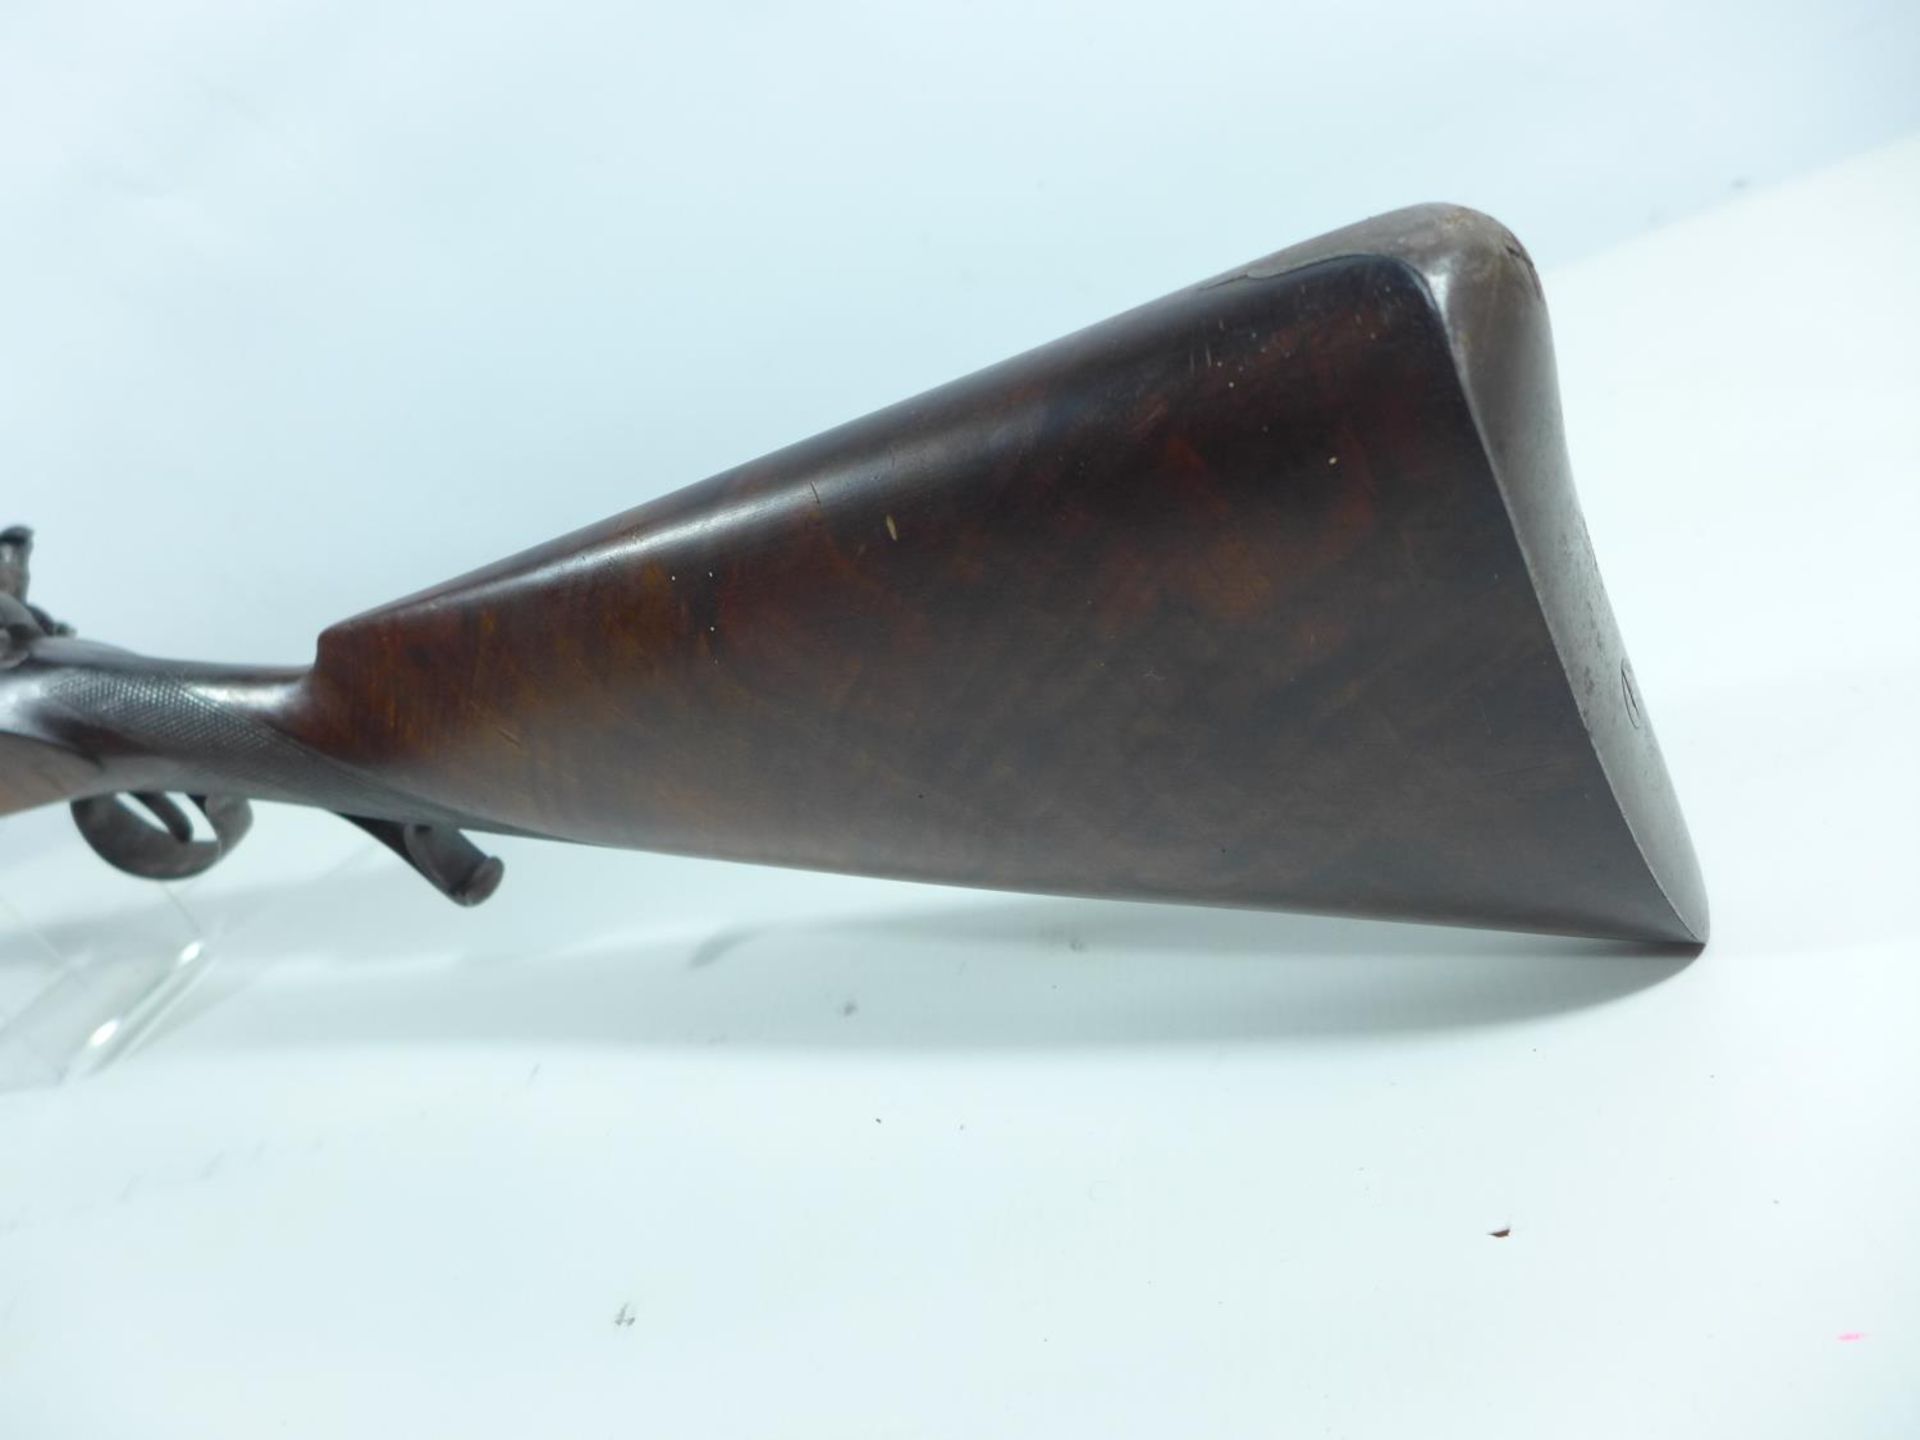 A SNYDER CONVERTED DEACTIVATED SHOTGUN, 79CM BARREL, LOCK MARKED WATSON AND SON, LENGTH 127CM - Image 7 of 8